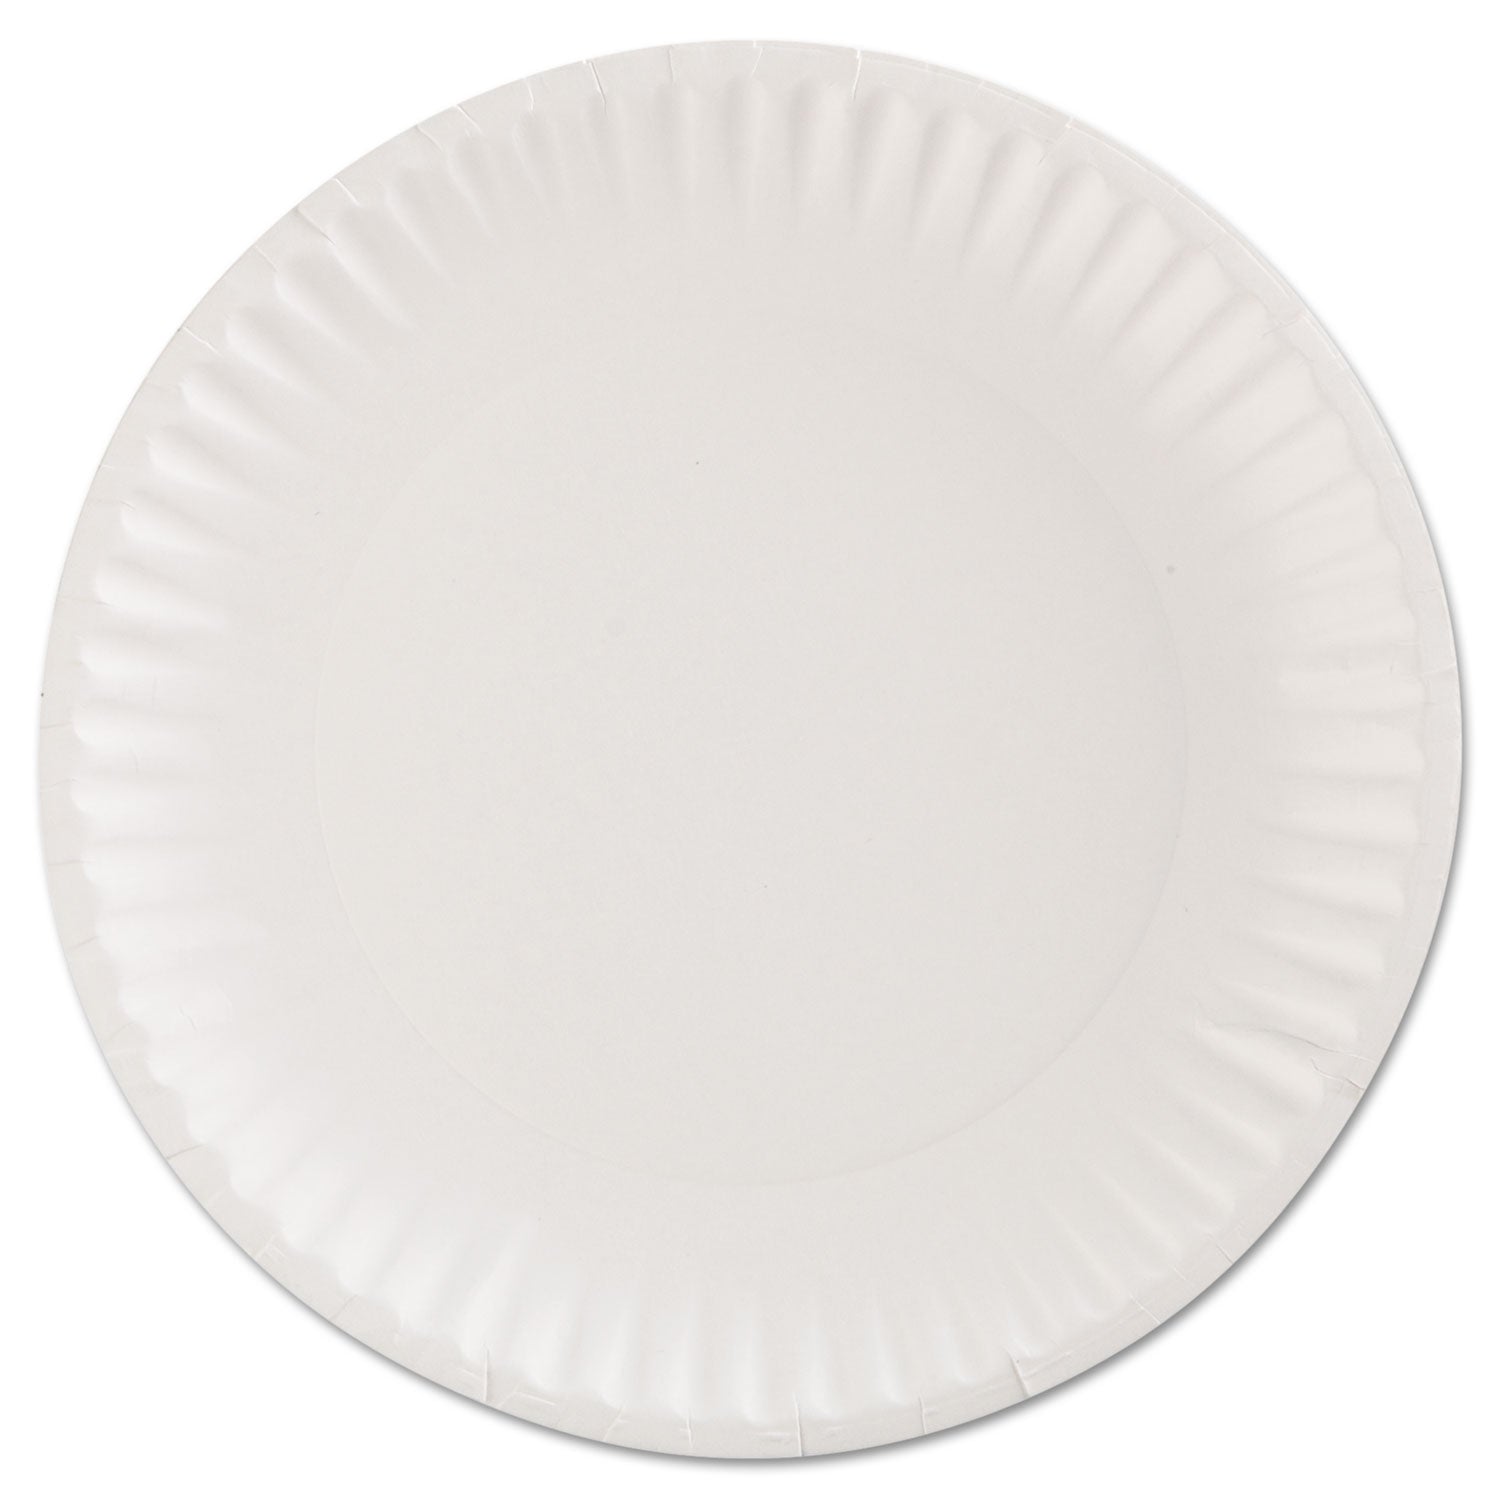 Gold Label Coated Paper Plates, 9" dia, White, 100/Pack, 10 Packs/Carton - 